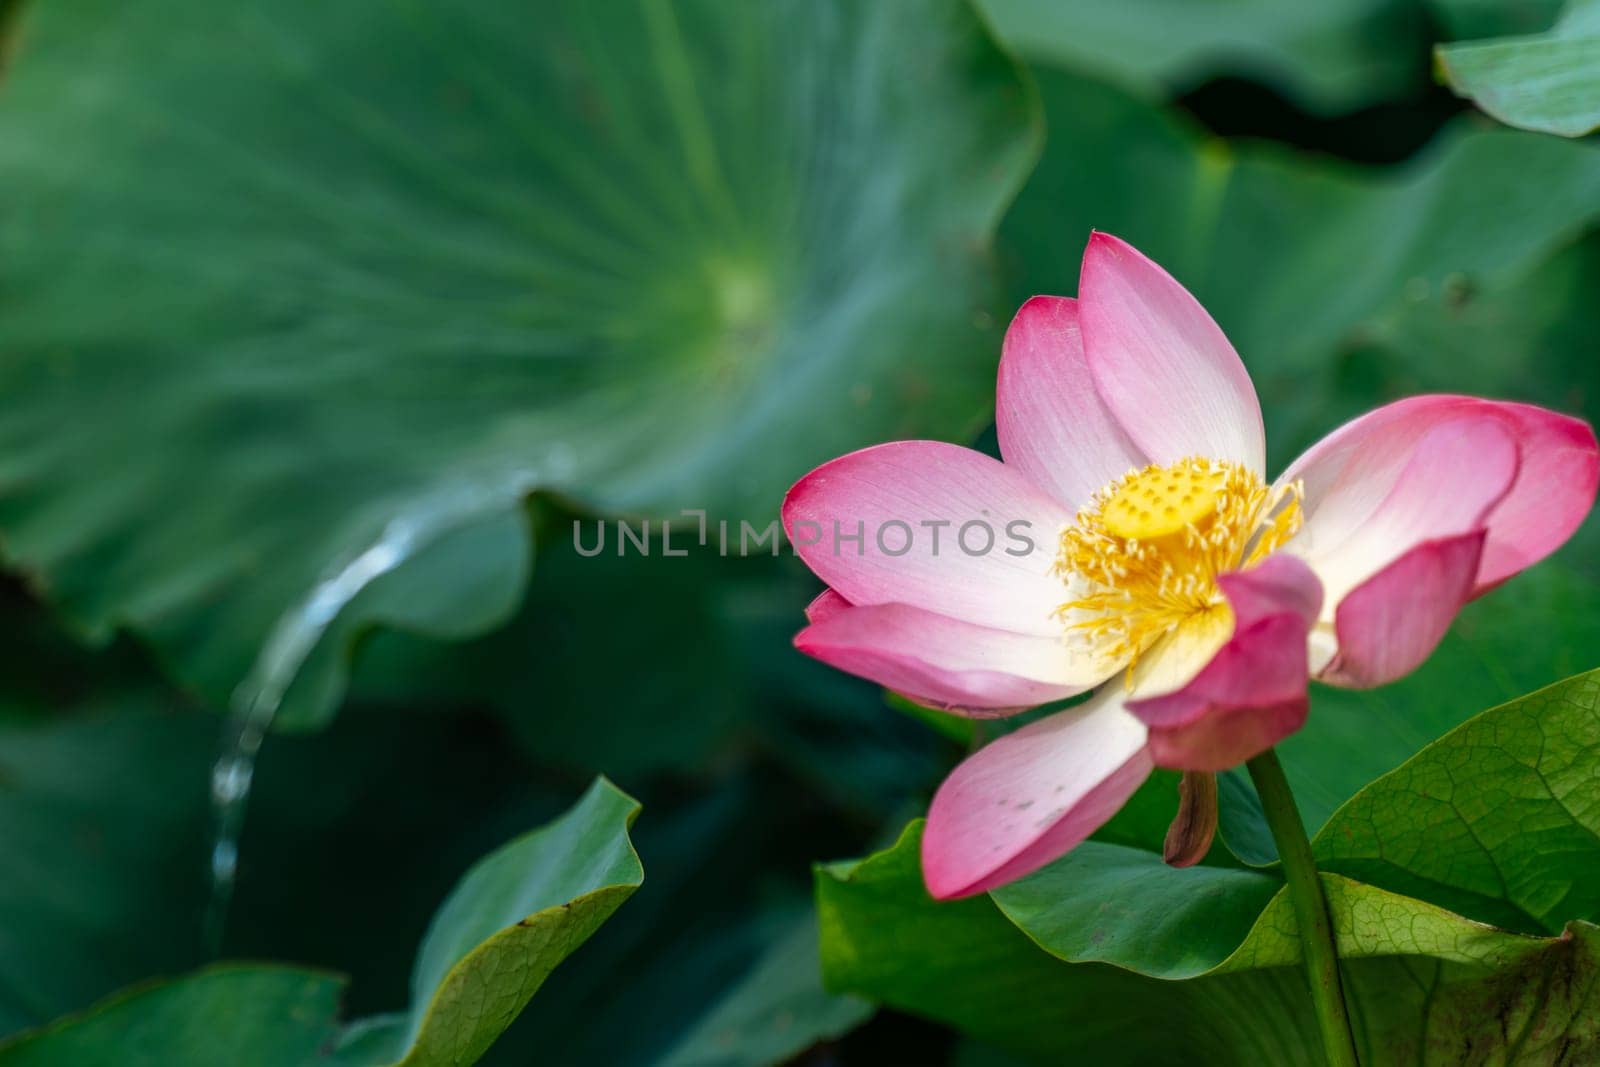 A pink lotus flower sways in the wind, Nelumbo nucifera. Against the background of their green leaves. Lotus field on the lake in natural environment